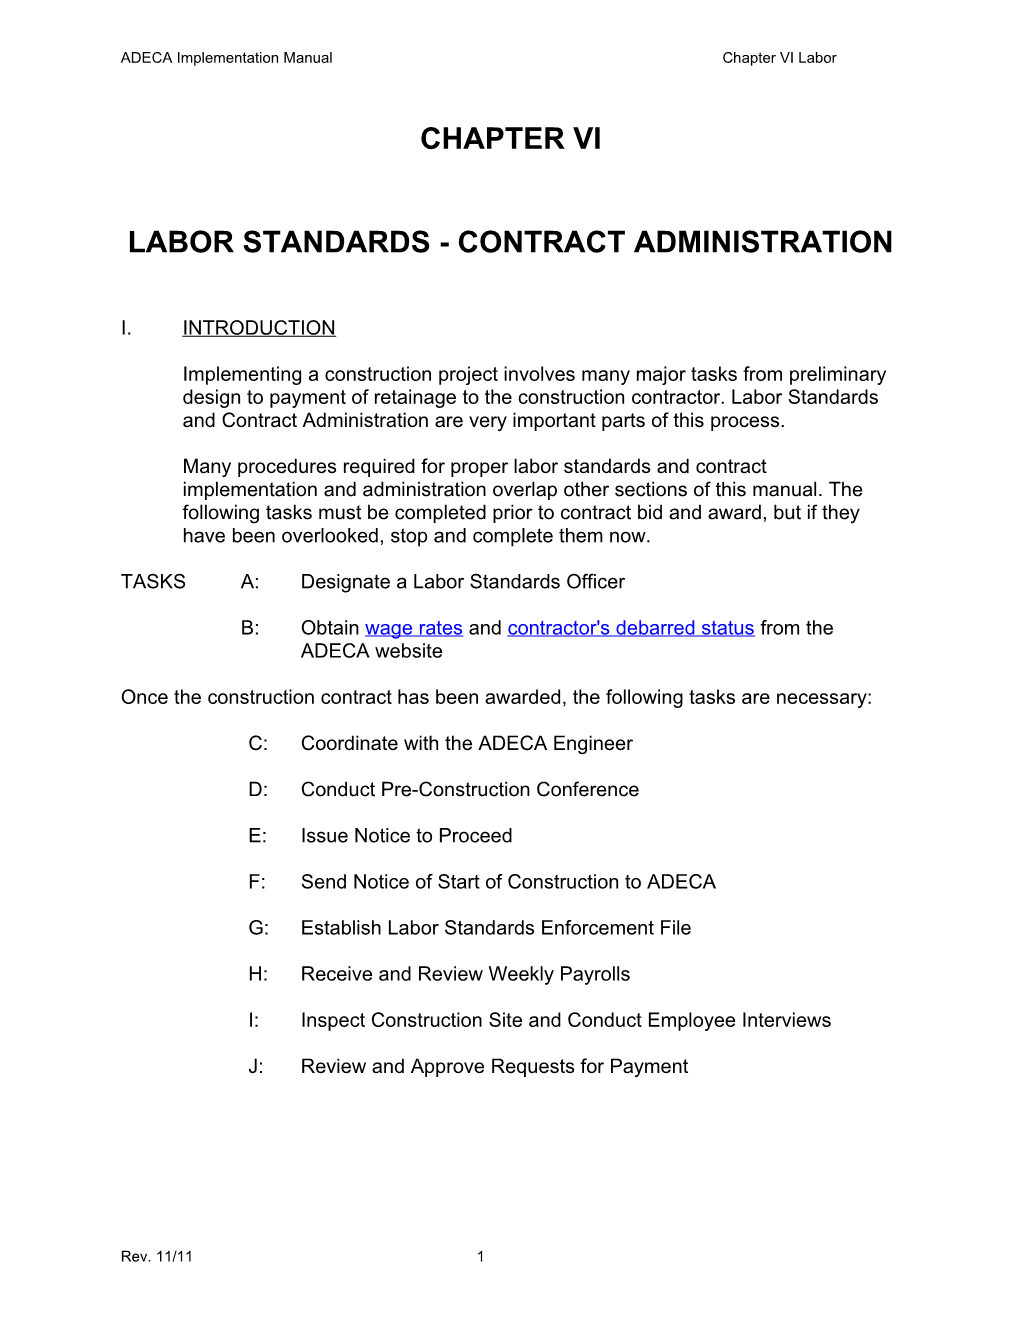 Labor Standards - Contract Administration